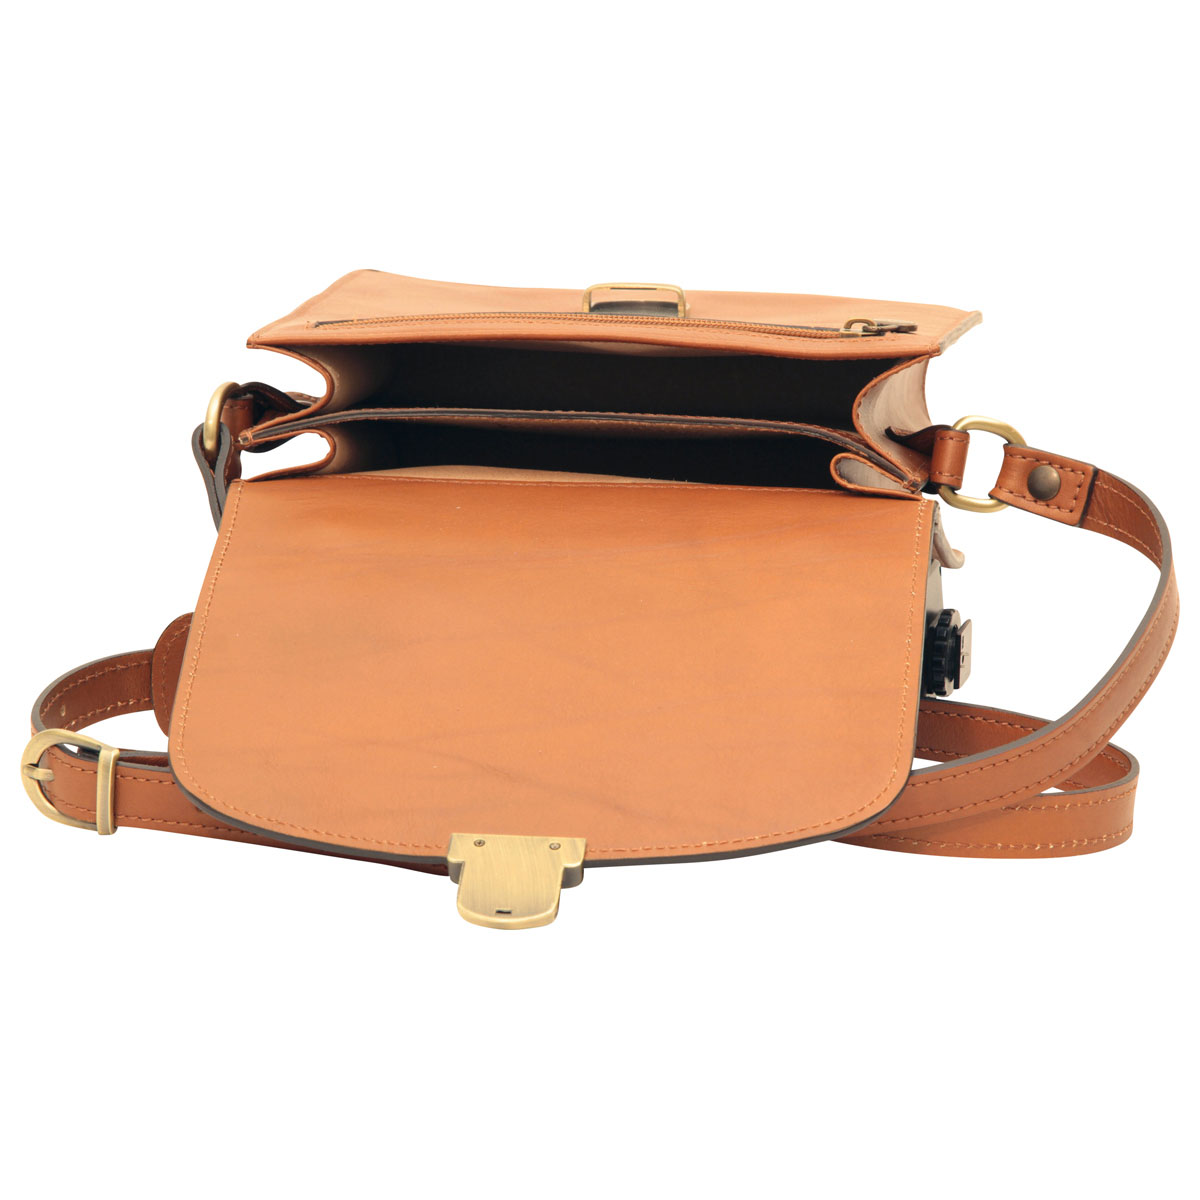 Classica II Leather Satchel - Brown Colonial | 079689CO | EURO | Old Angler Firenze